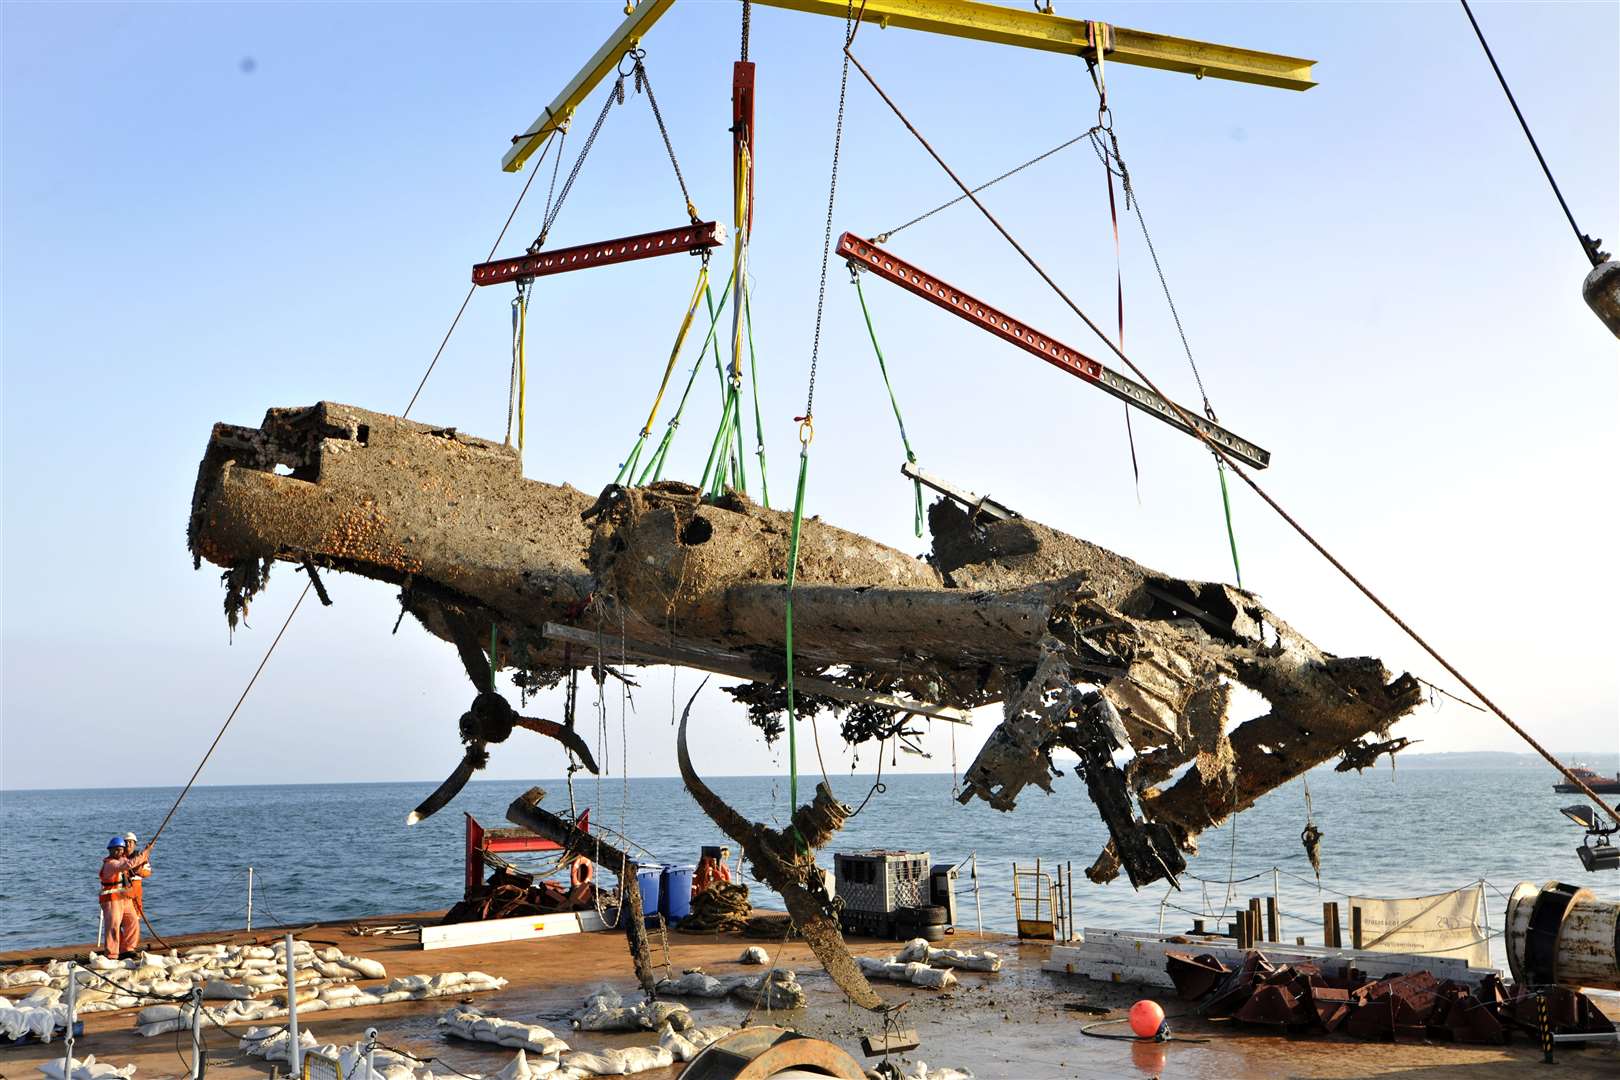 A rare intact Dornier 17 bomber was salvaged from the Goodwin Sands. Picture: Trustees of the Royal Air Force Museum